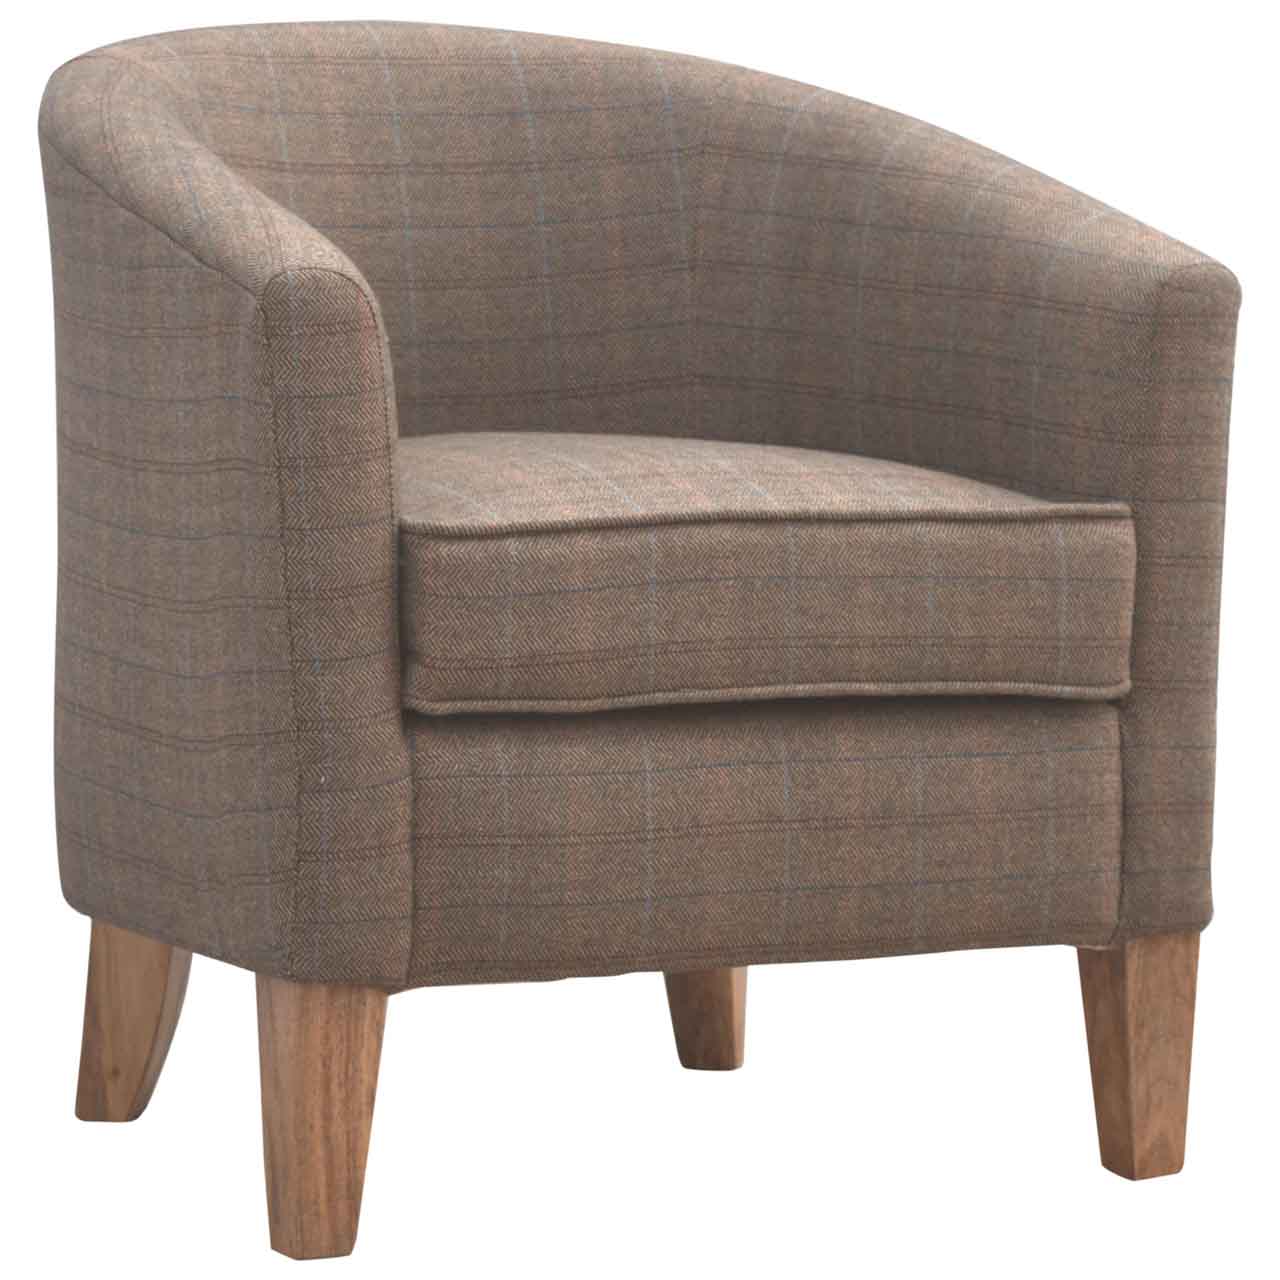 View Upholstered Tweed Tub Chair information